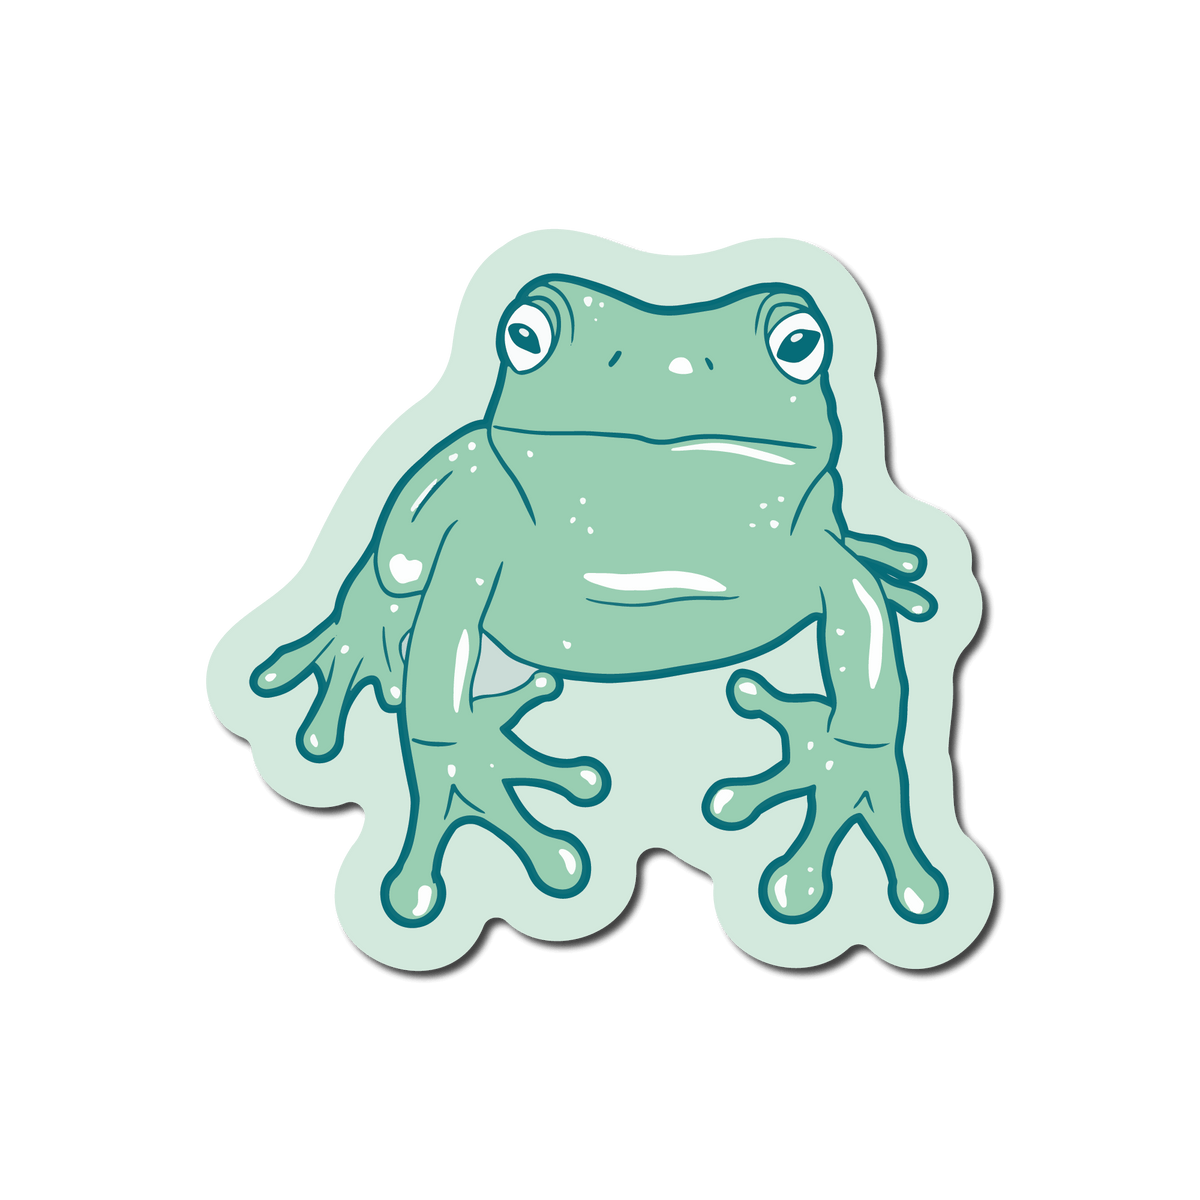 Small Waterproof Sticker of a Green Frog for a Phone Case